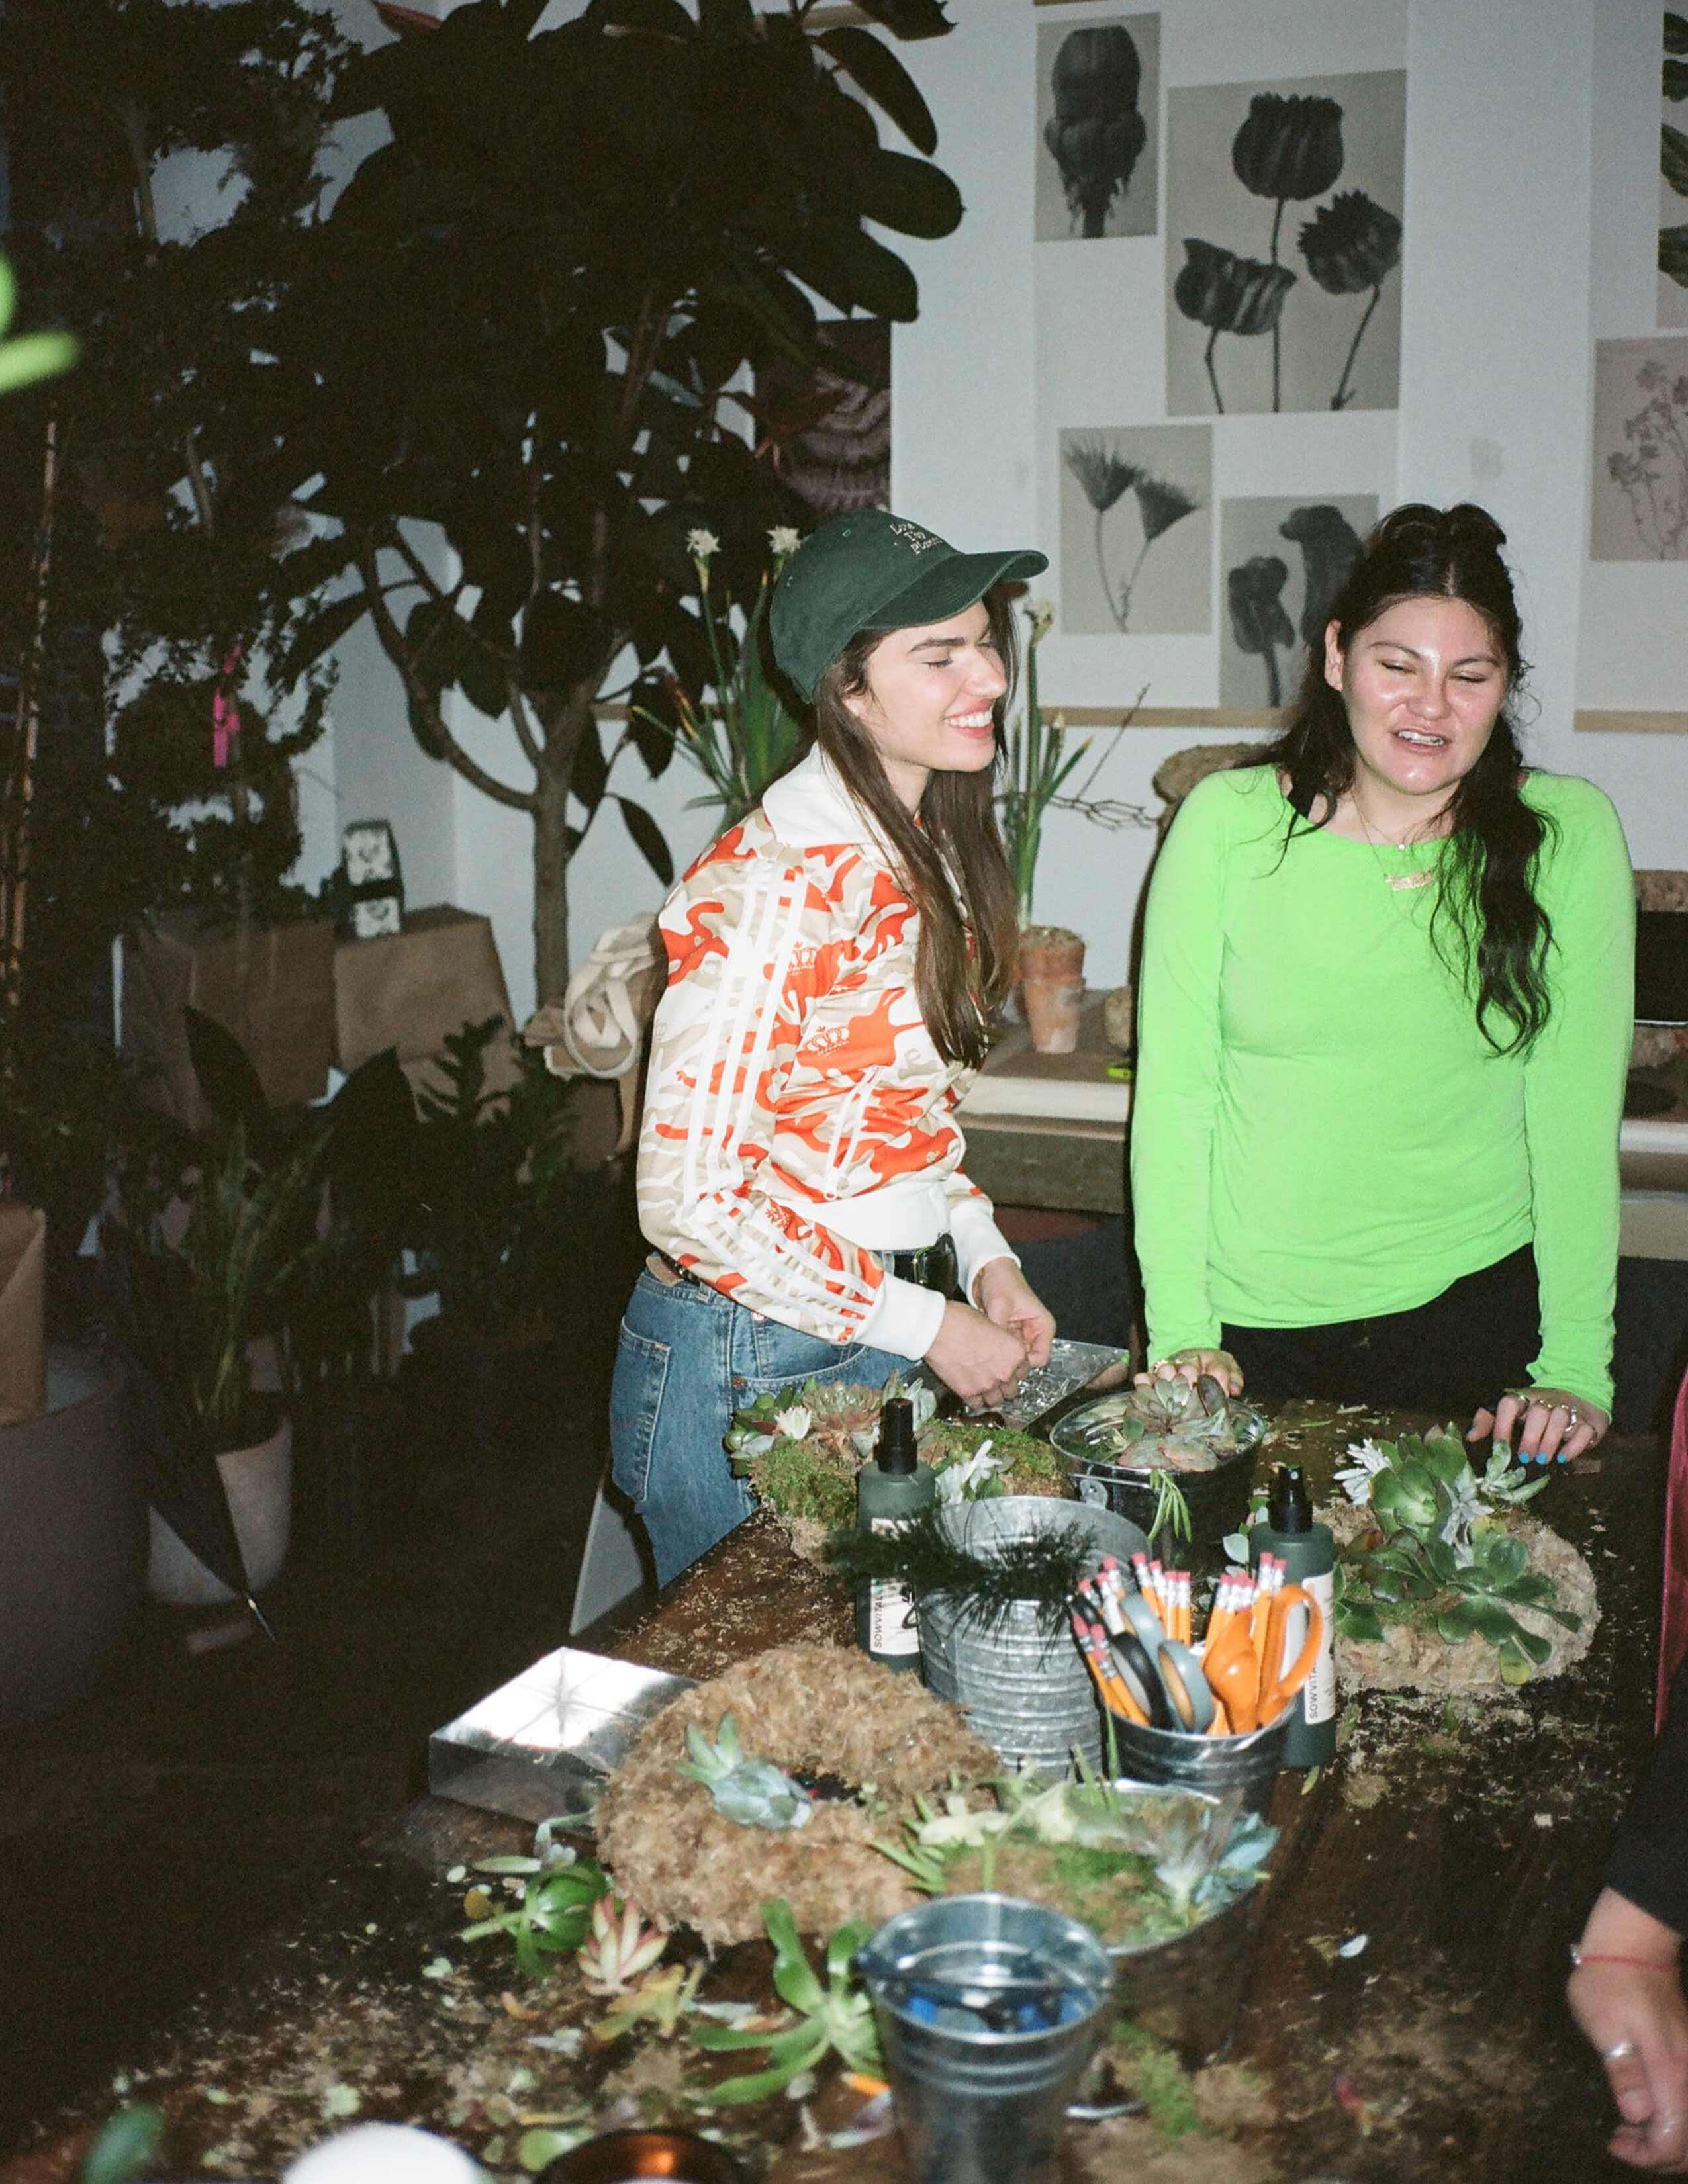 A photograph of people making themselves succulent wreaths while the table was covered with loads of materials and there were potted plants behind.